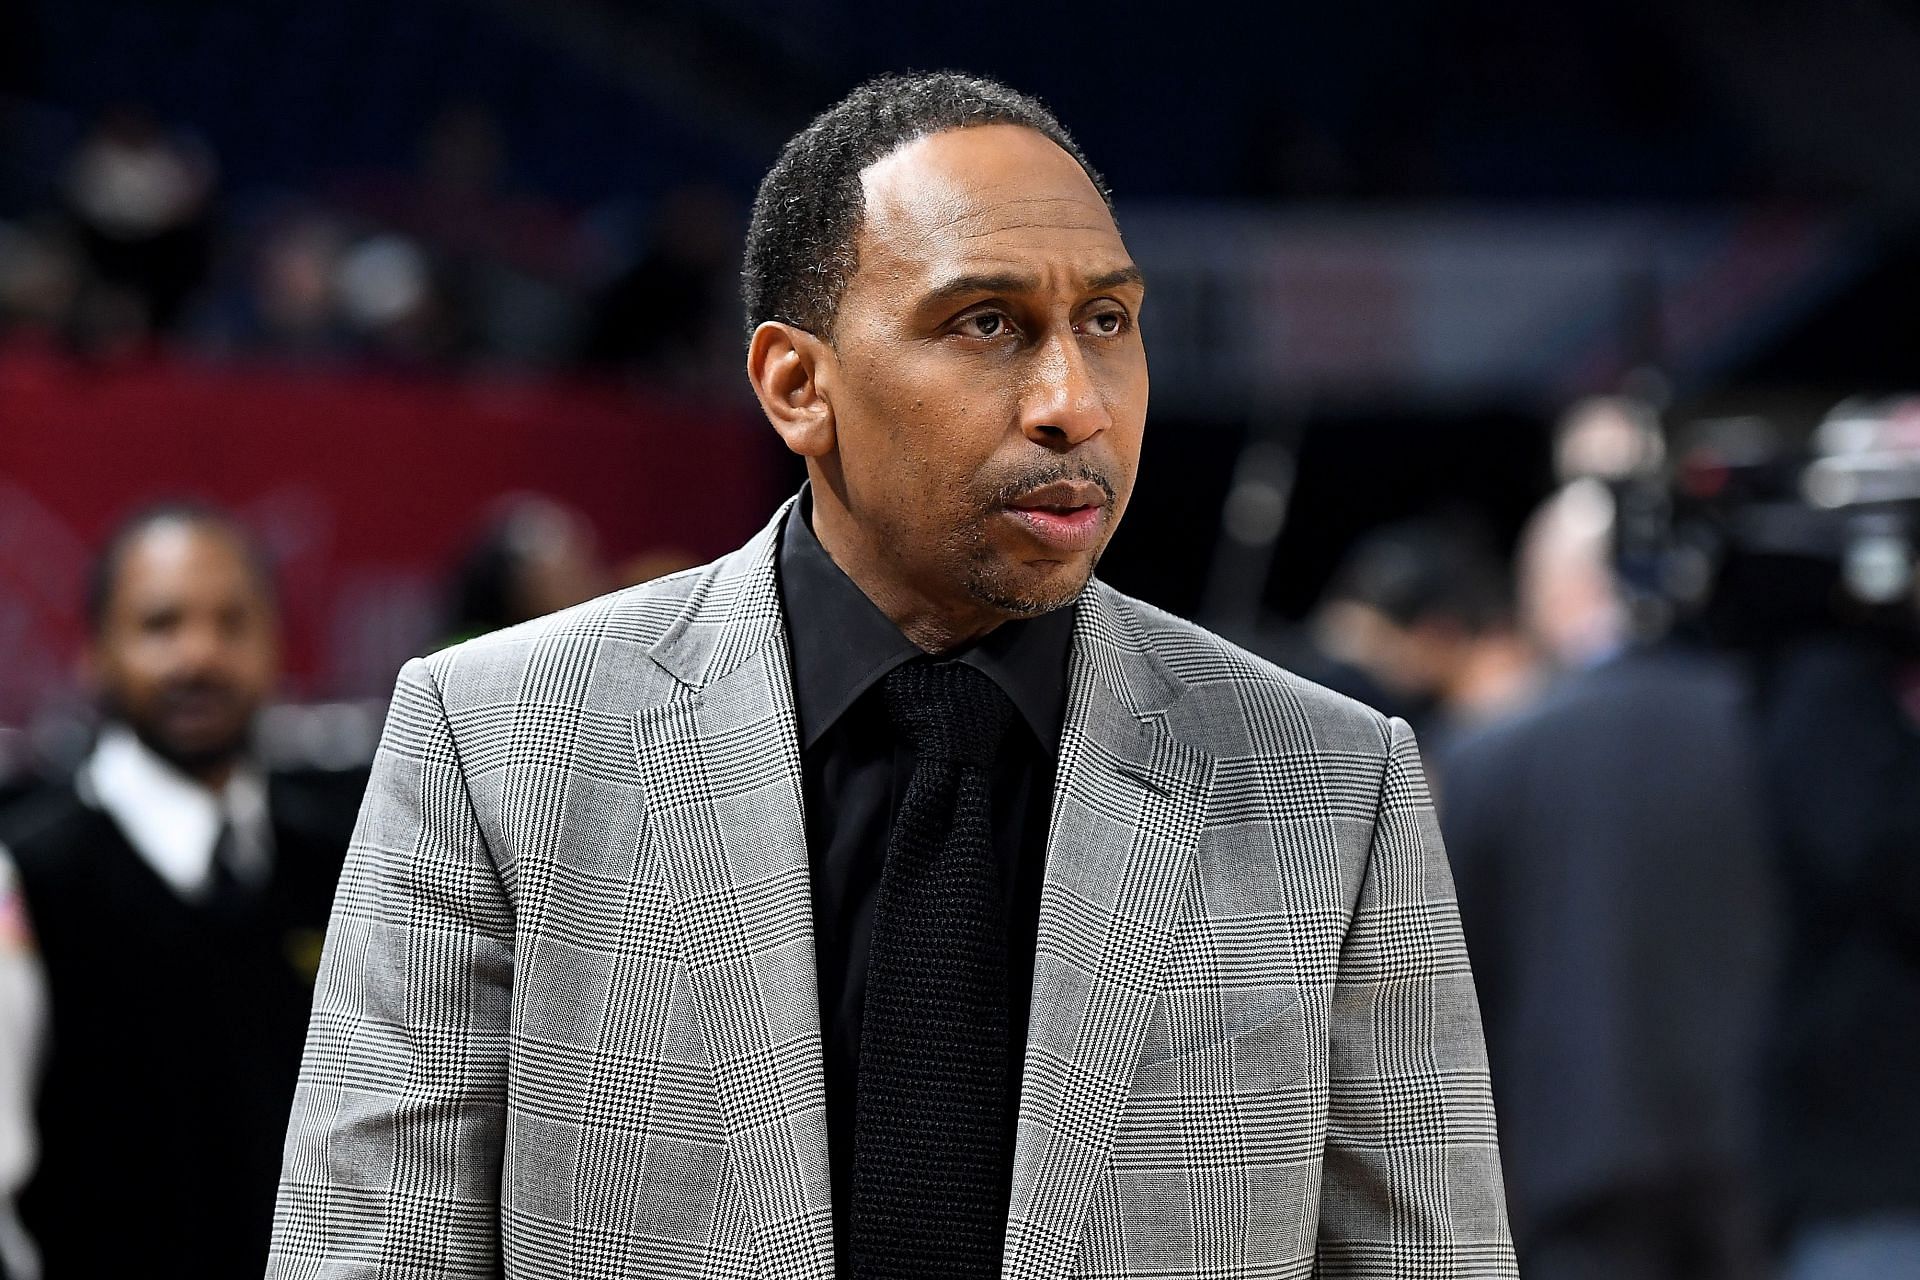 Stephen A. Smith at the 2020 NBA All-Star - Celebrity Game Presented By Ruffles